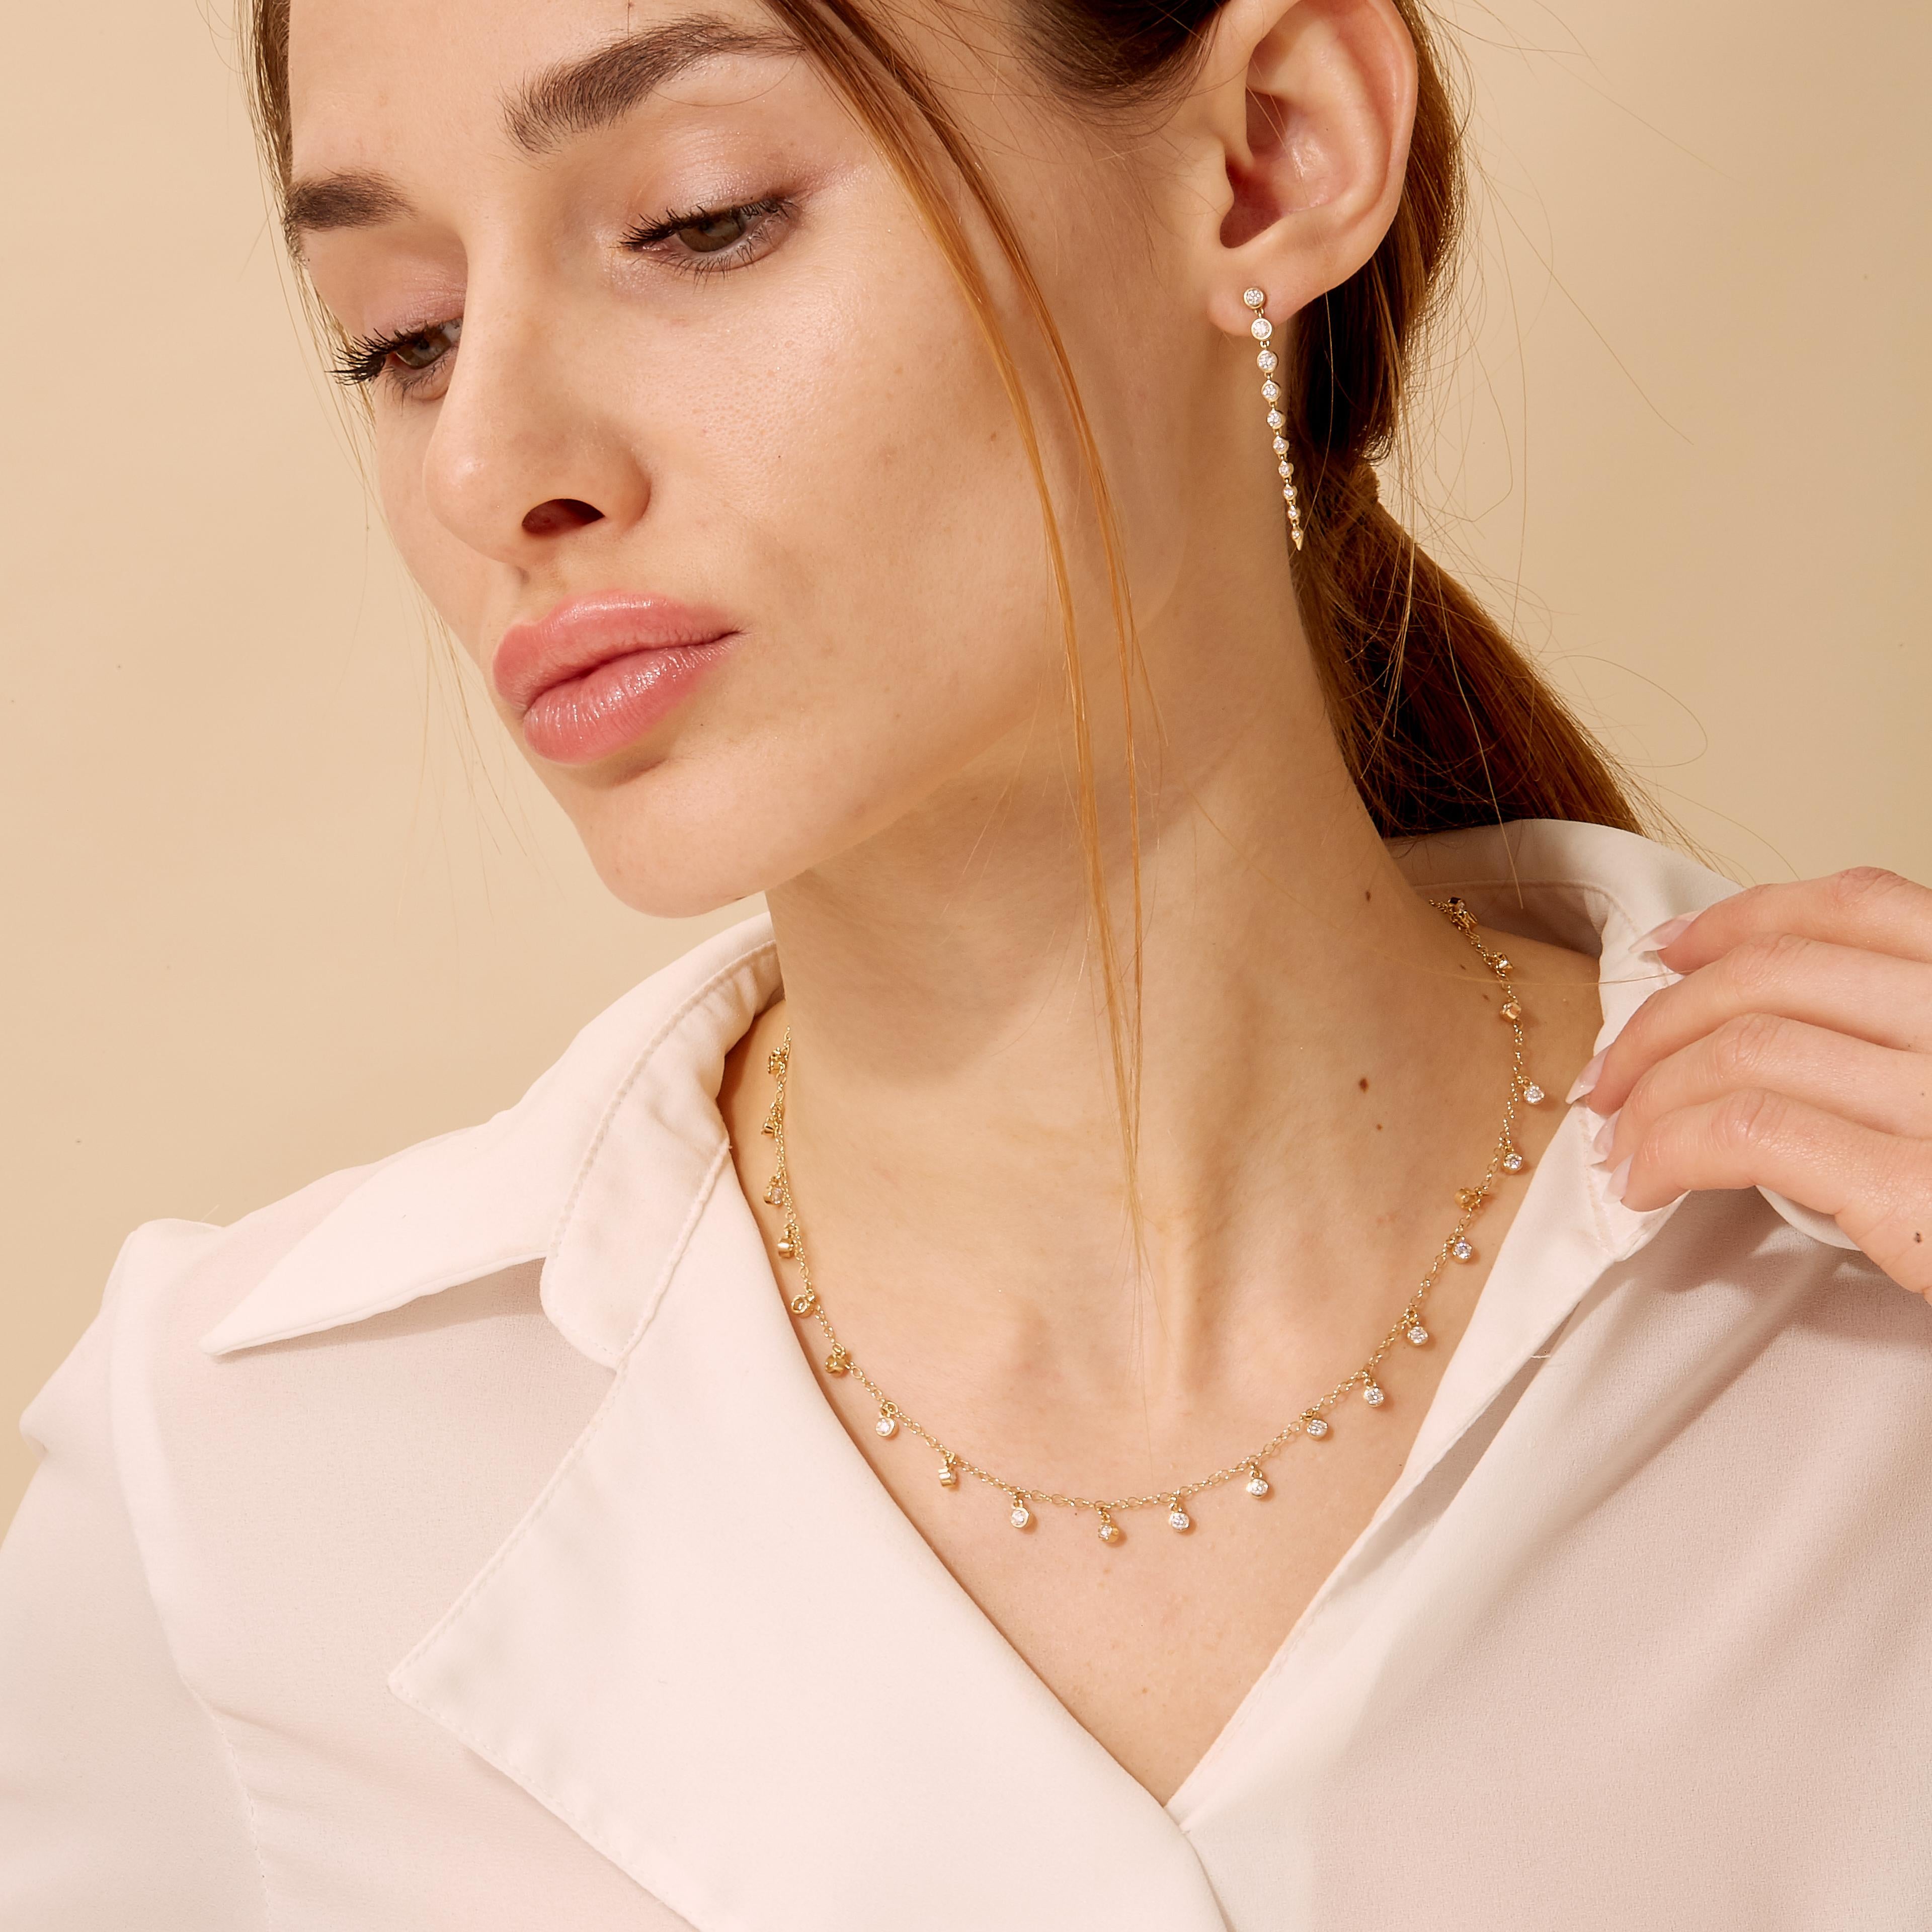 Created in 18 karat yellow gold
Diamonds 1.90 carats approx.
18 inch length
18kyg lobster clasp

Fashioned from 18 karat yellow gold, this necklace features 1.90 carats of diamonds with an 18